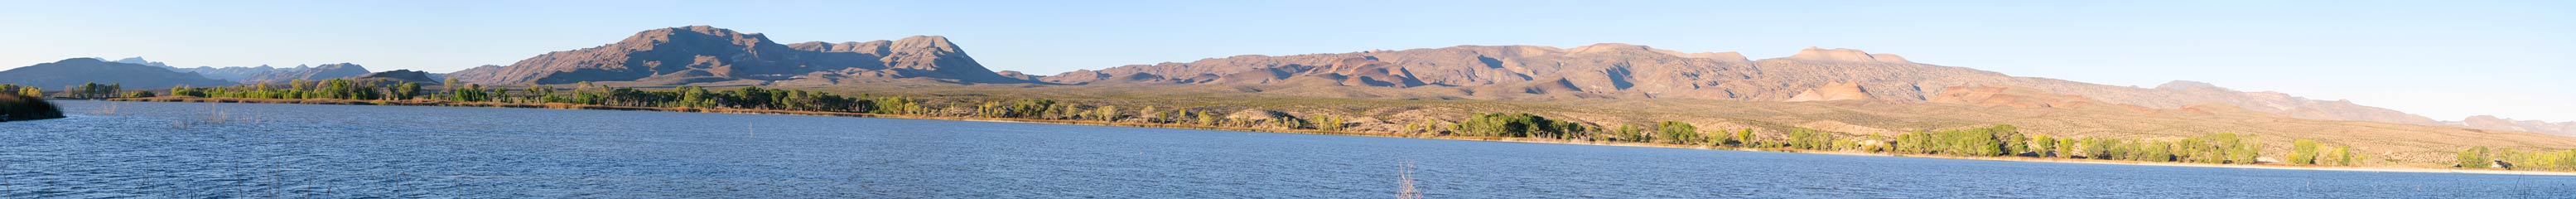 Panoramic view of lakeshore with desert in background.